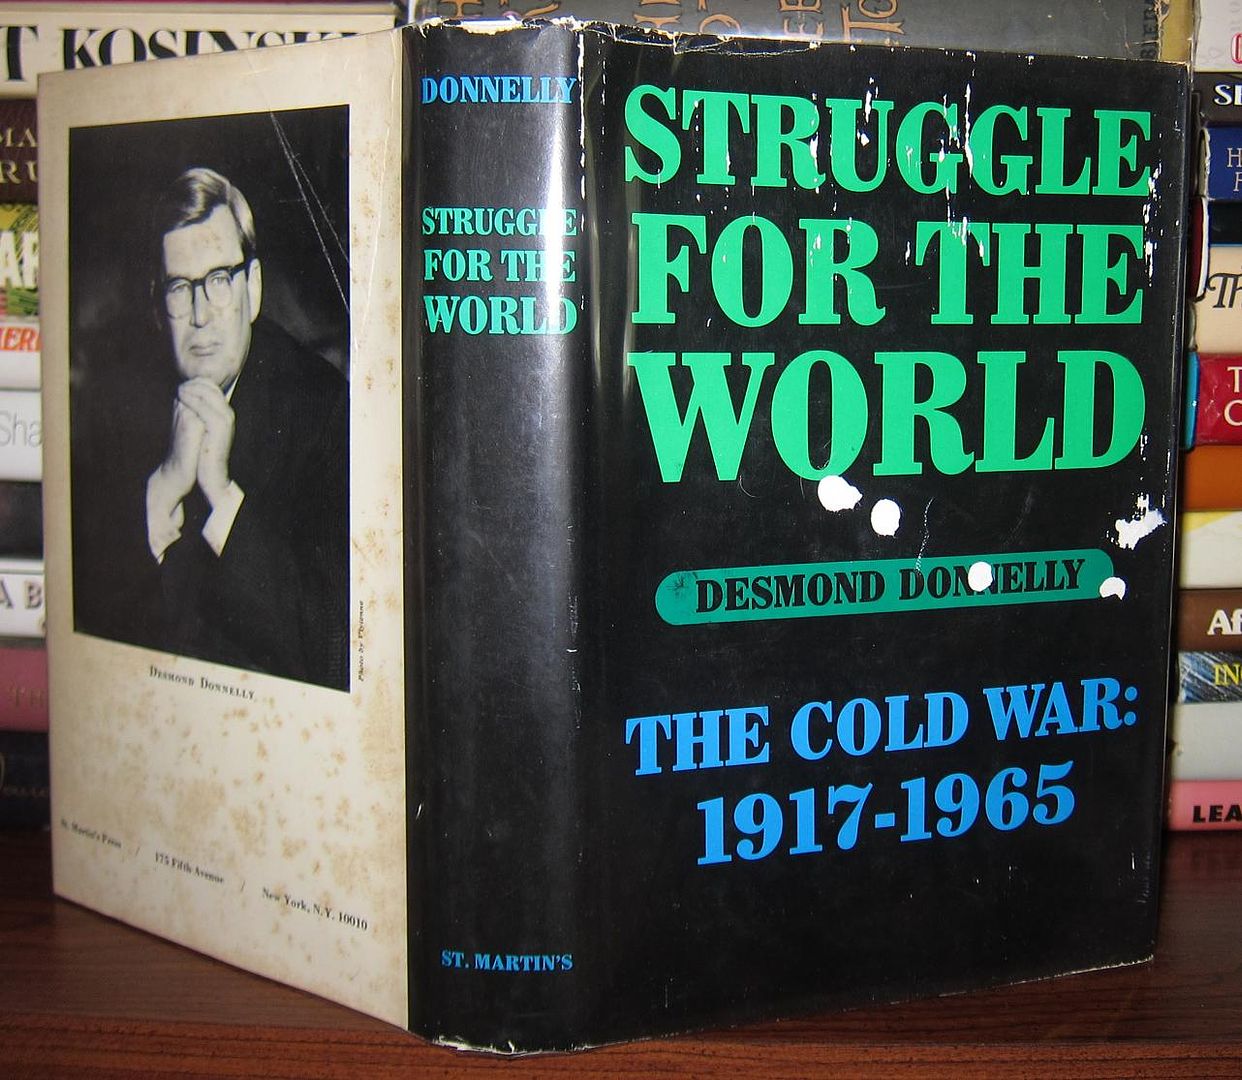 DONNELLY, DESMOND - Struggle for the World the Cold War : 1917-1965